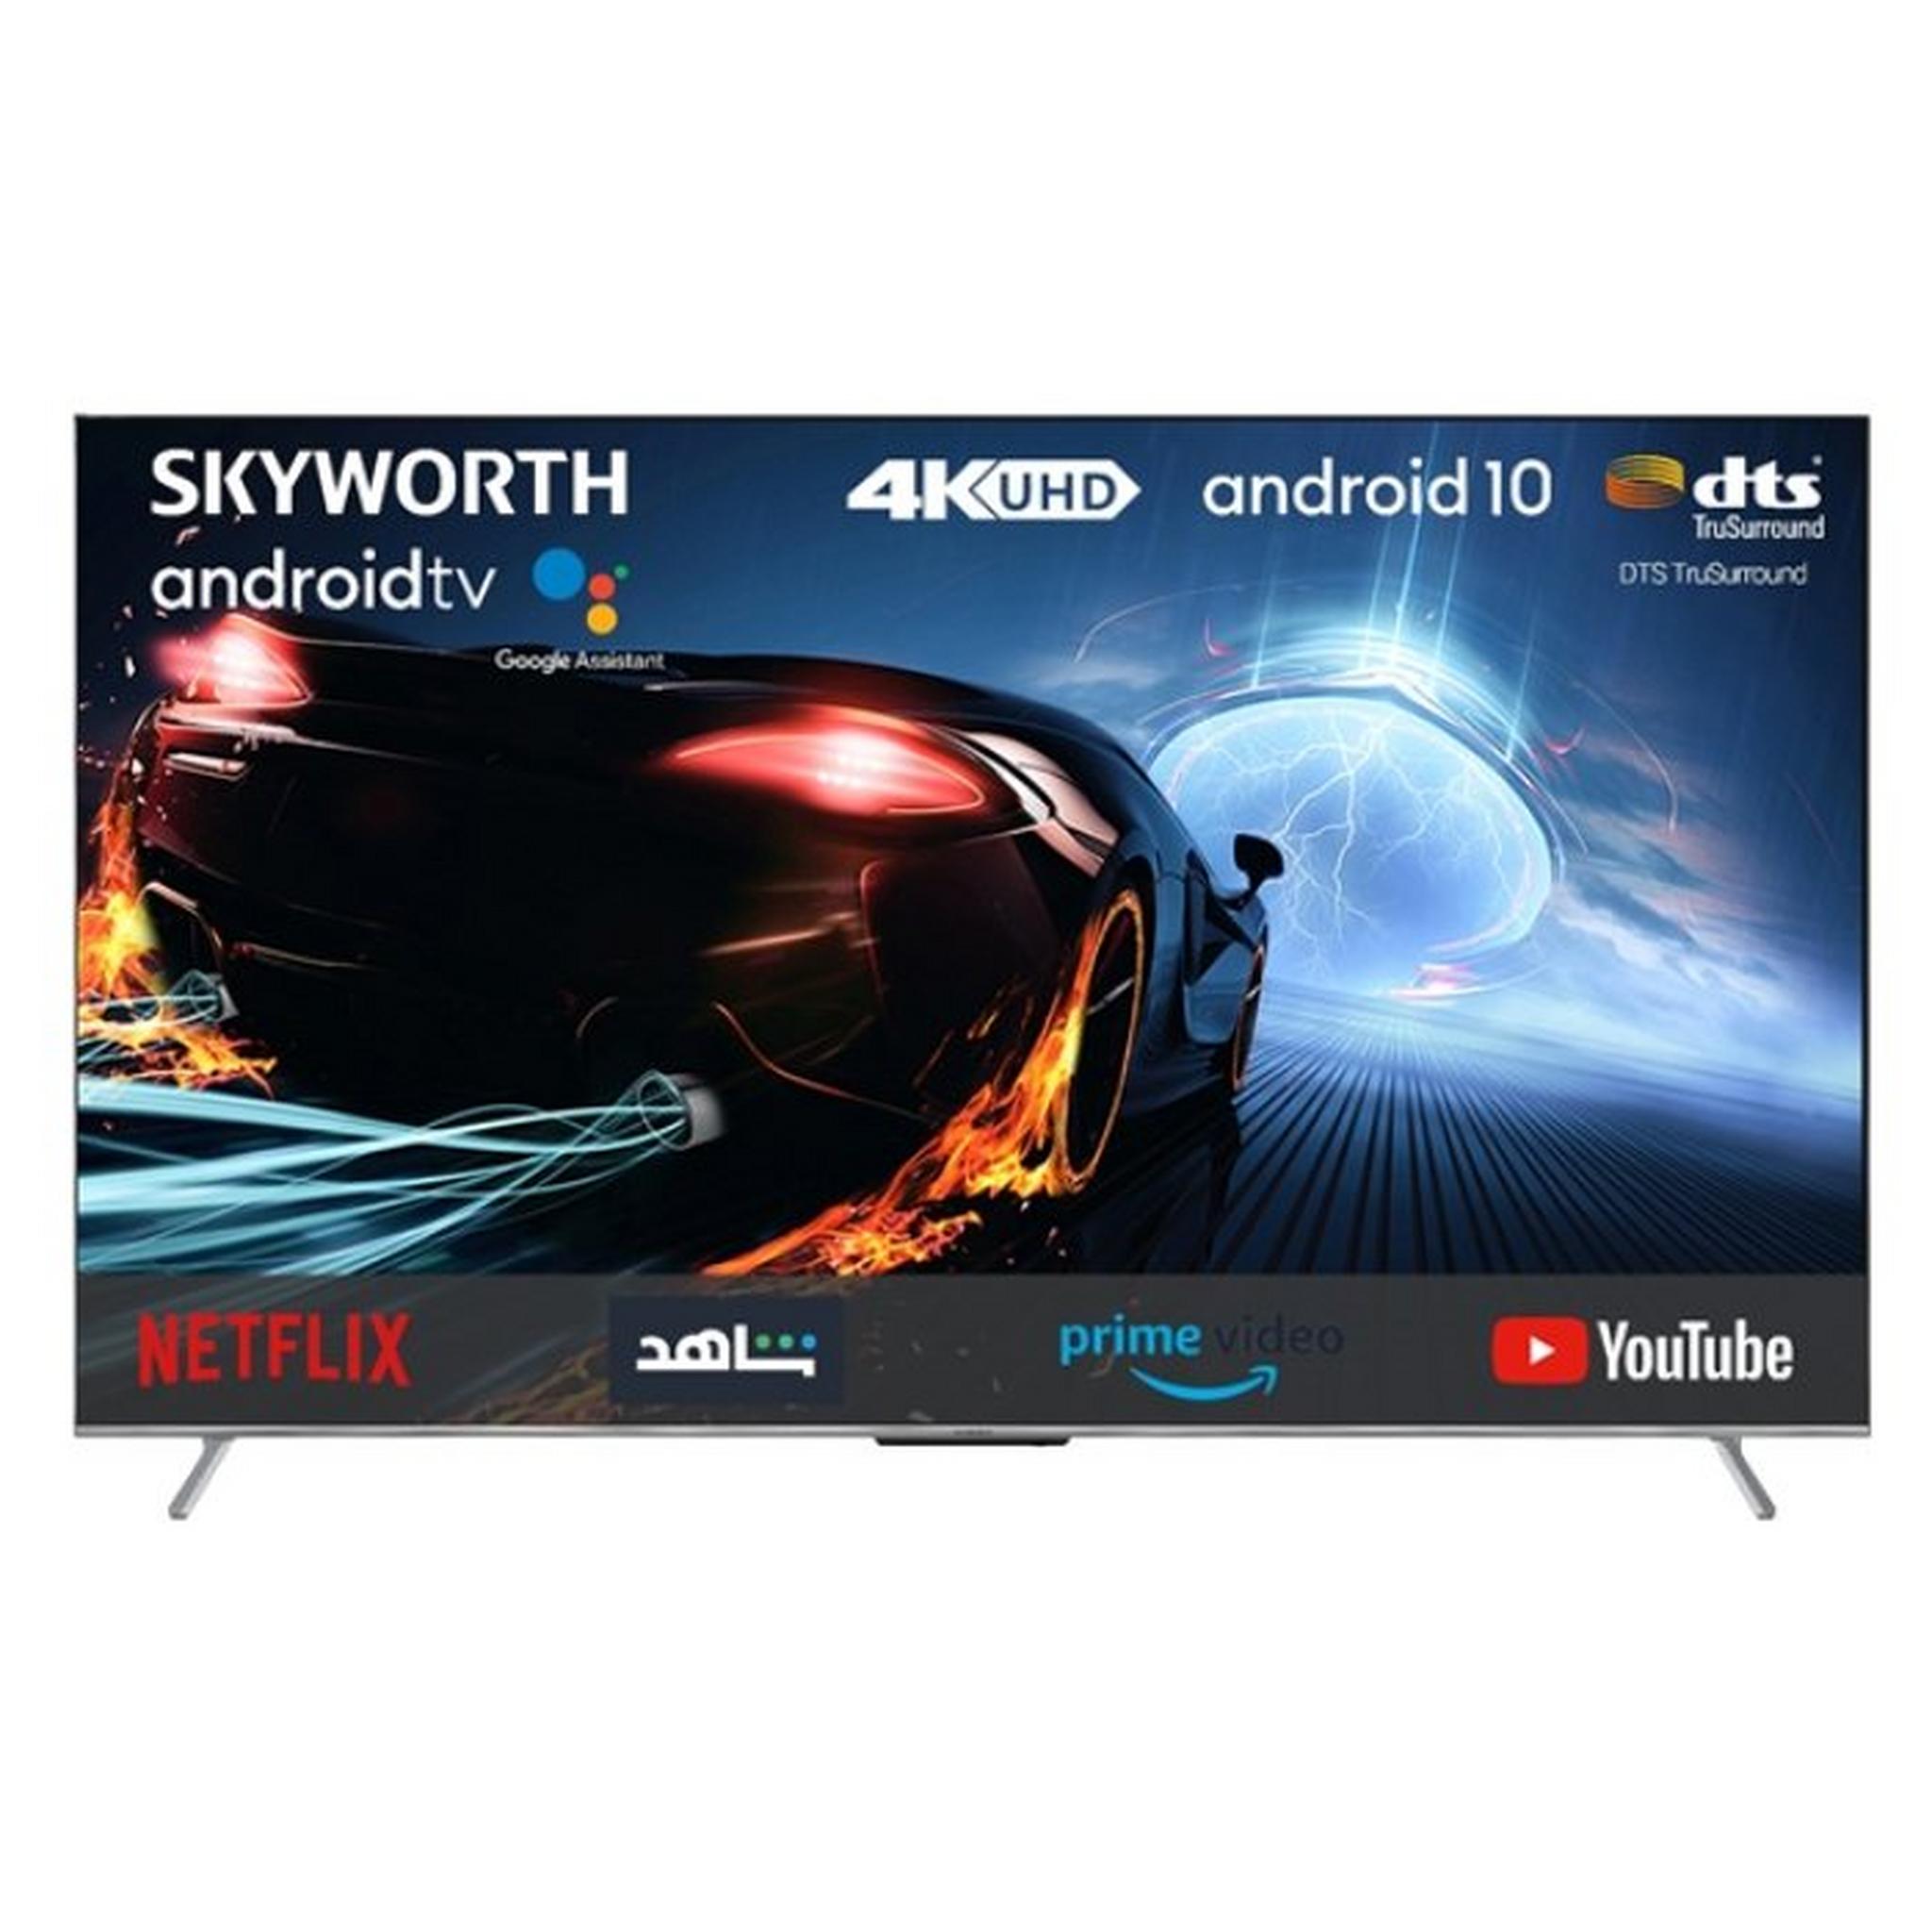 Skyworth 86-inch Android 4K LED TV (86SUC9500)